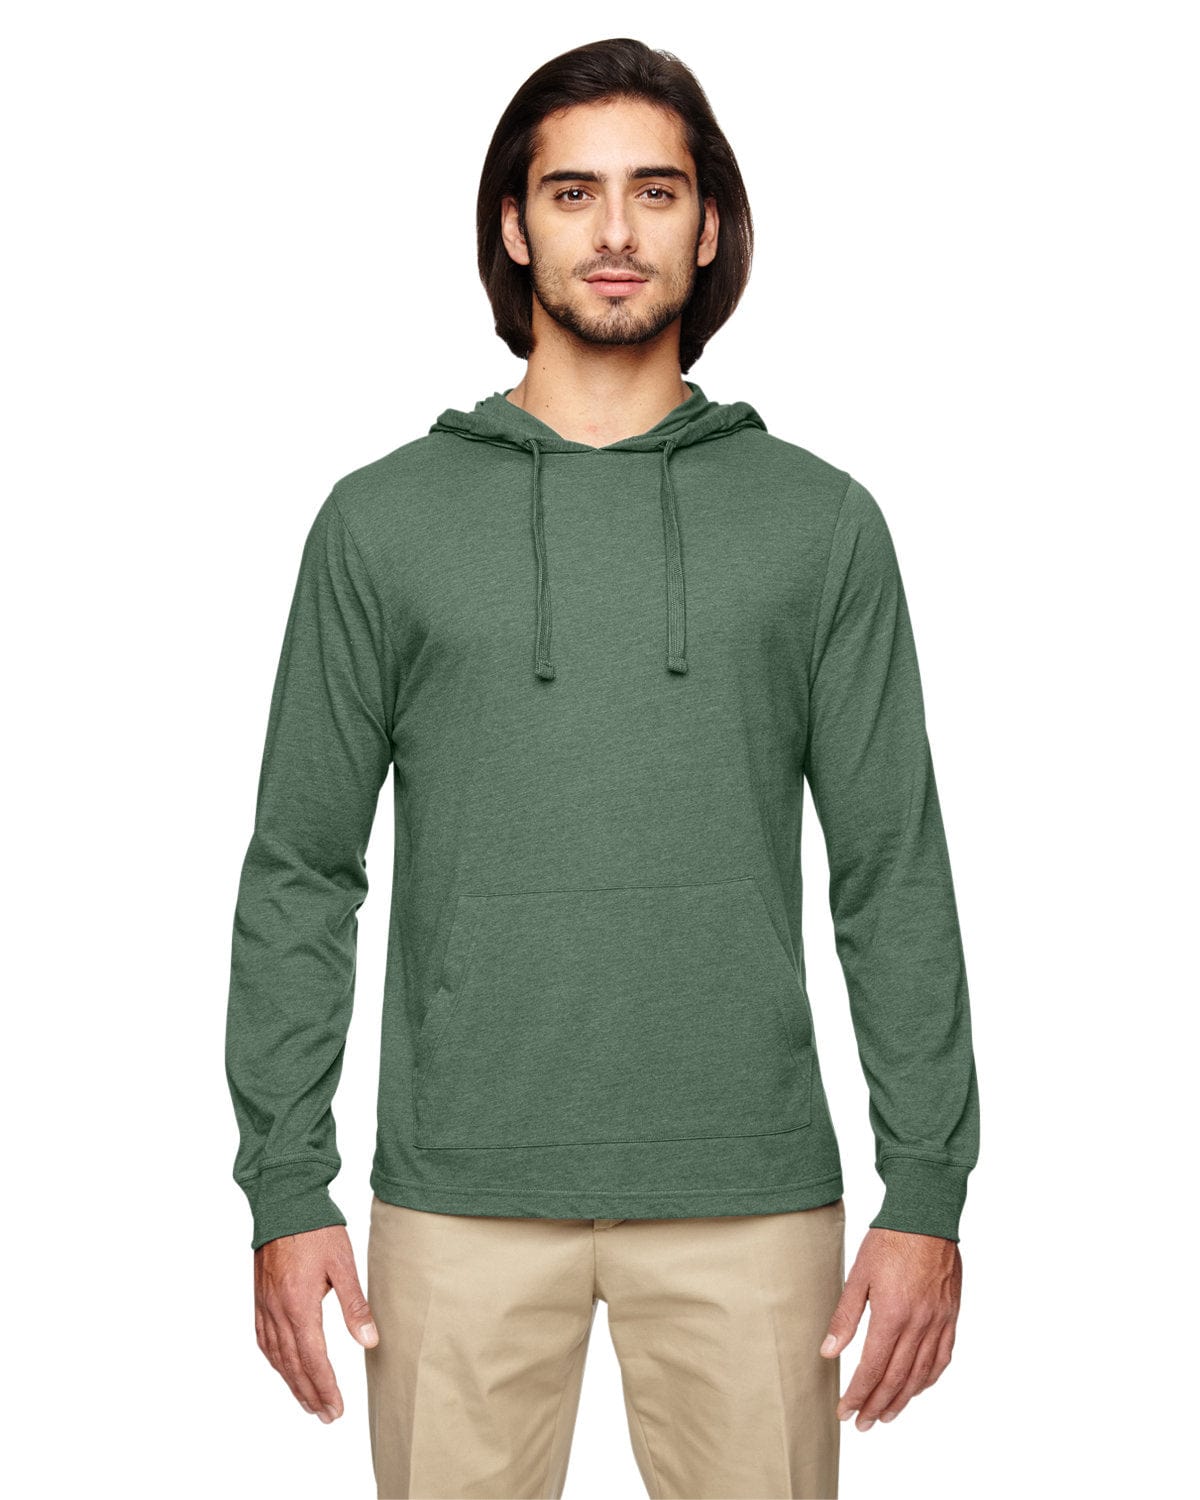 econscious EC1085: Unisex Blended Eco Jersey Pullover Hoodie